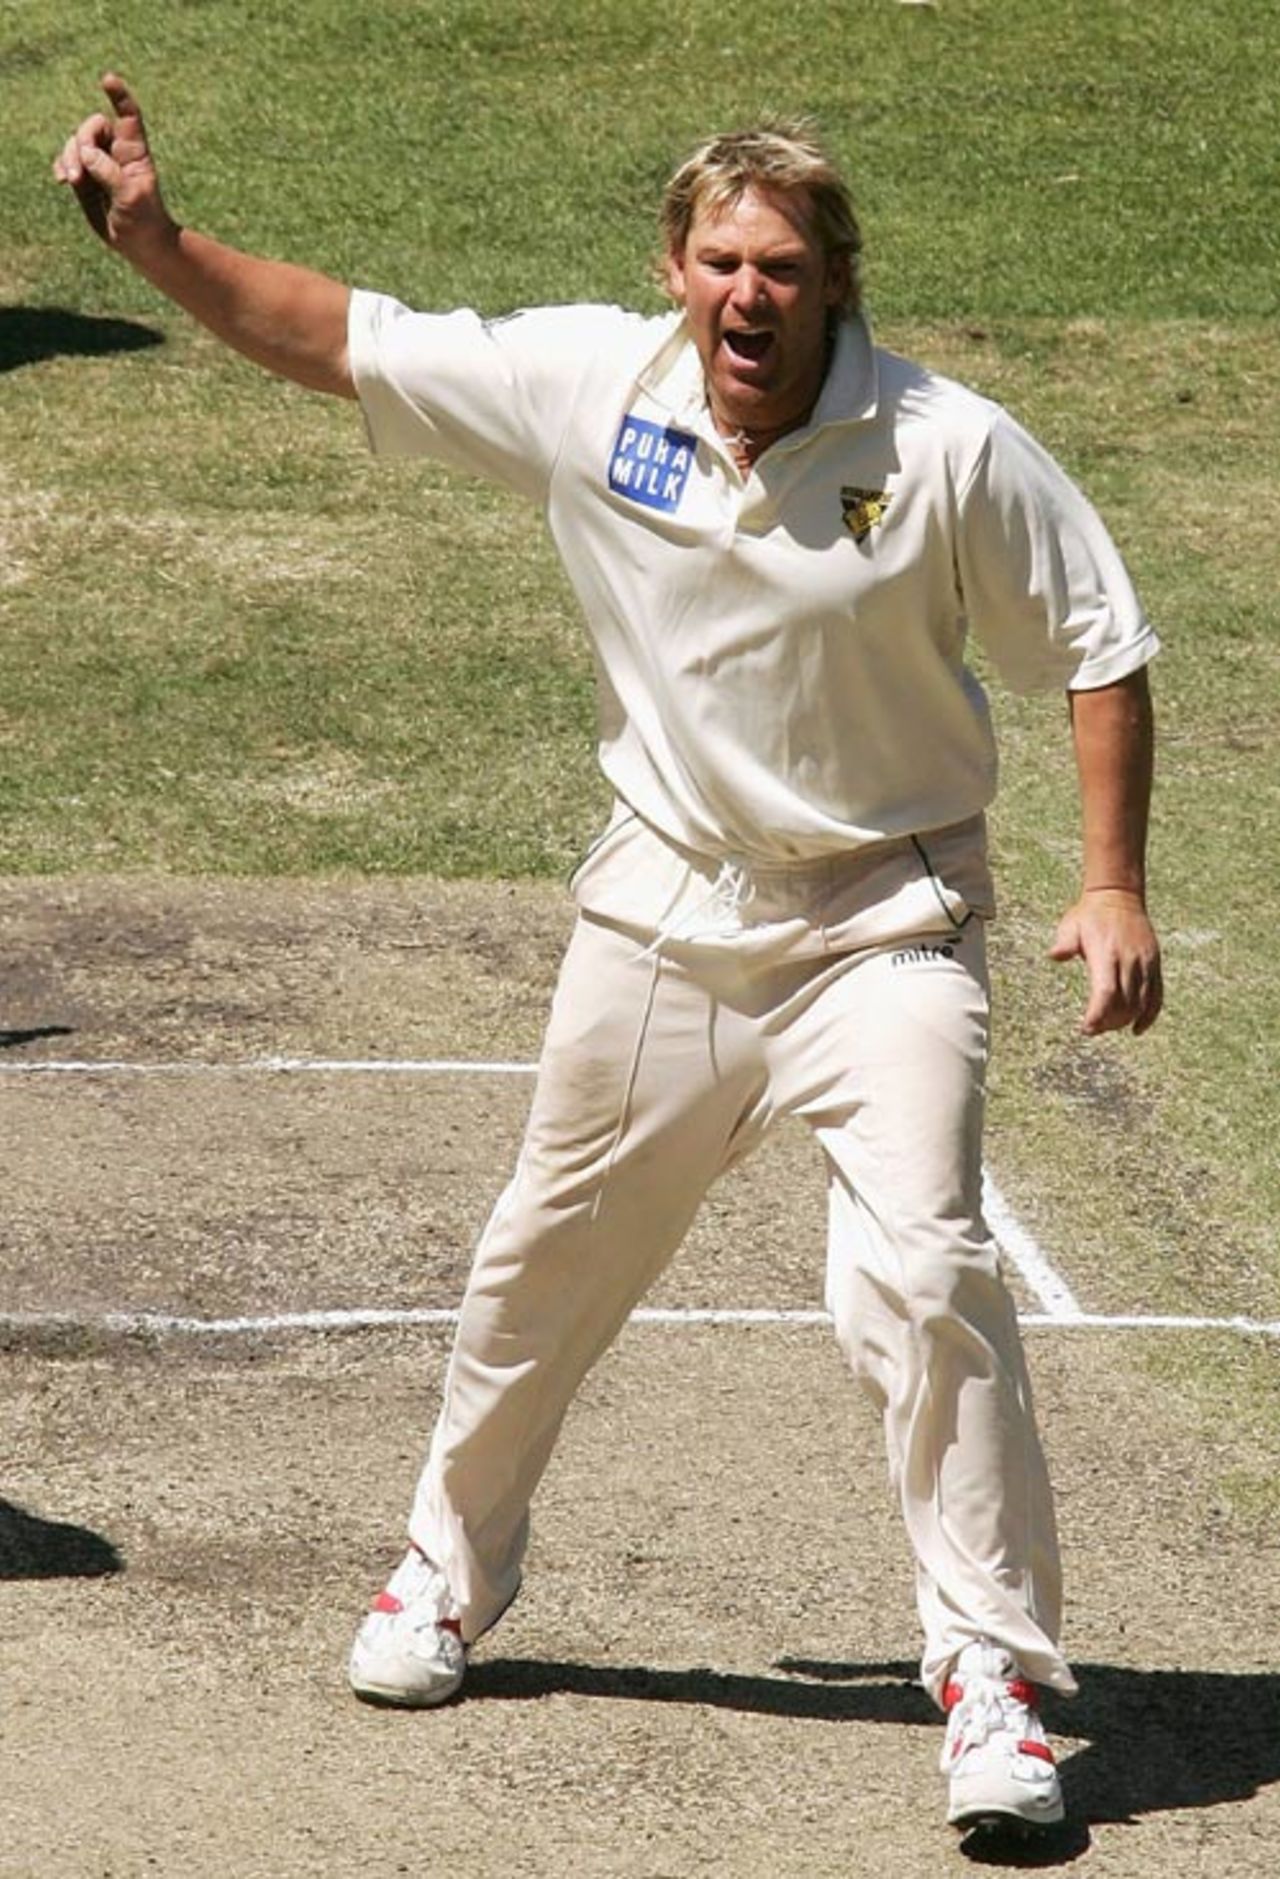 You could want Shane Warne on side if you go for Sporting's Stop at a stumping market